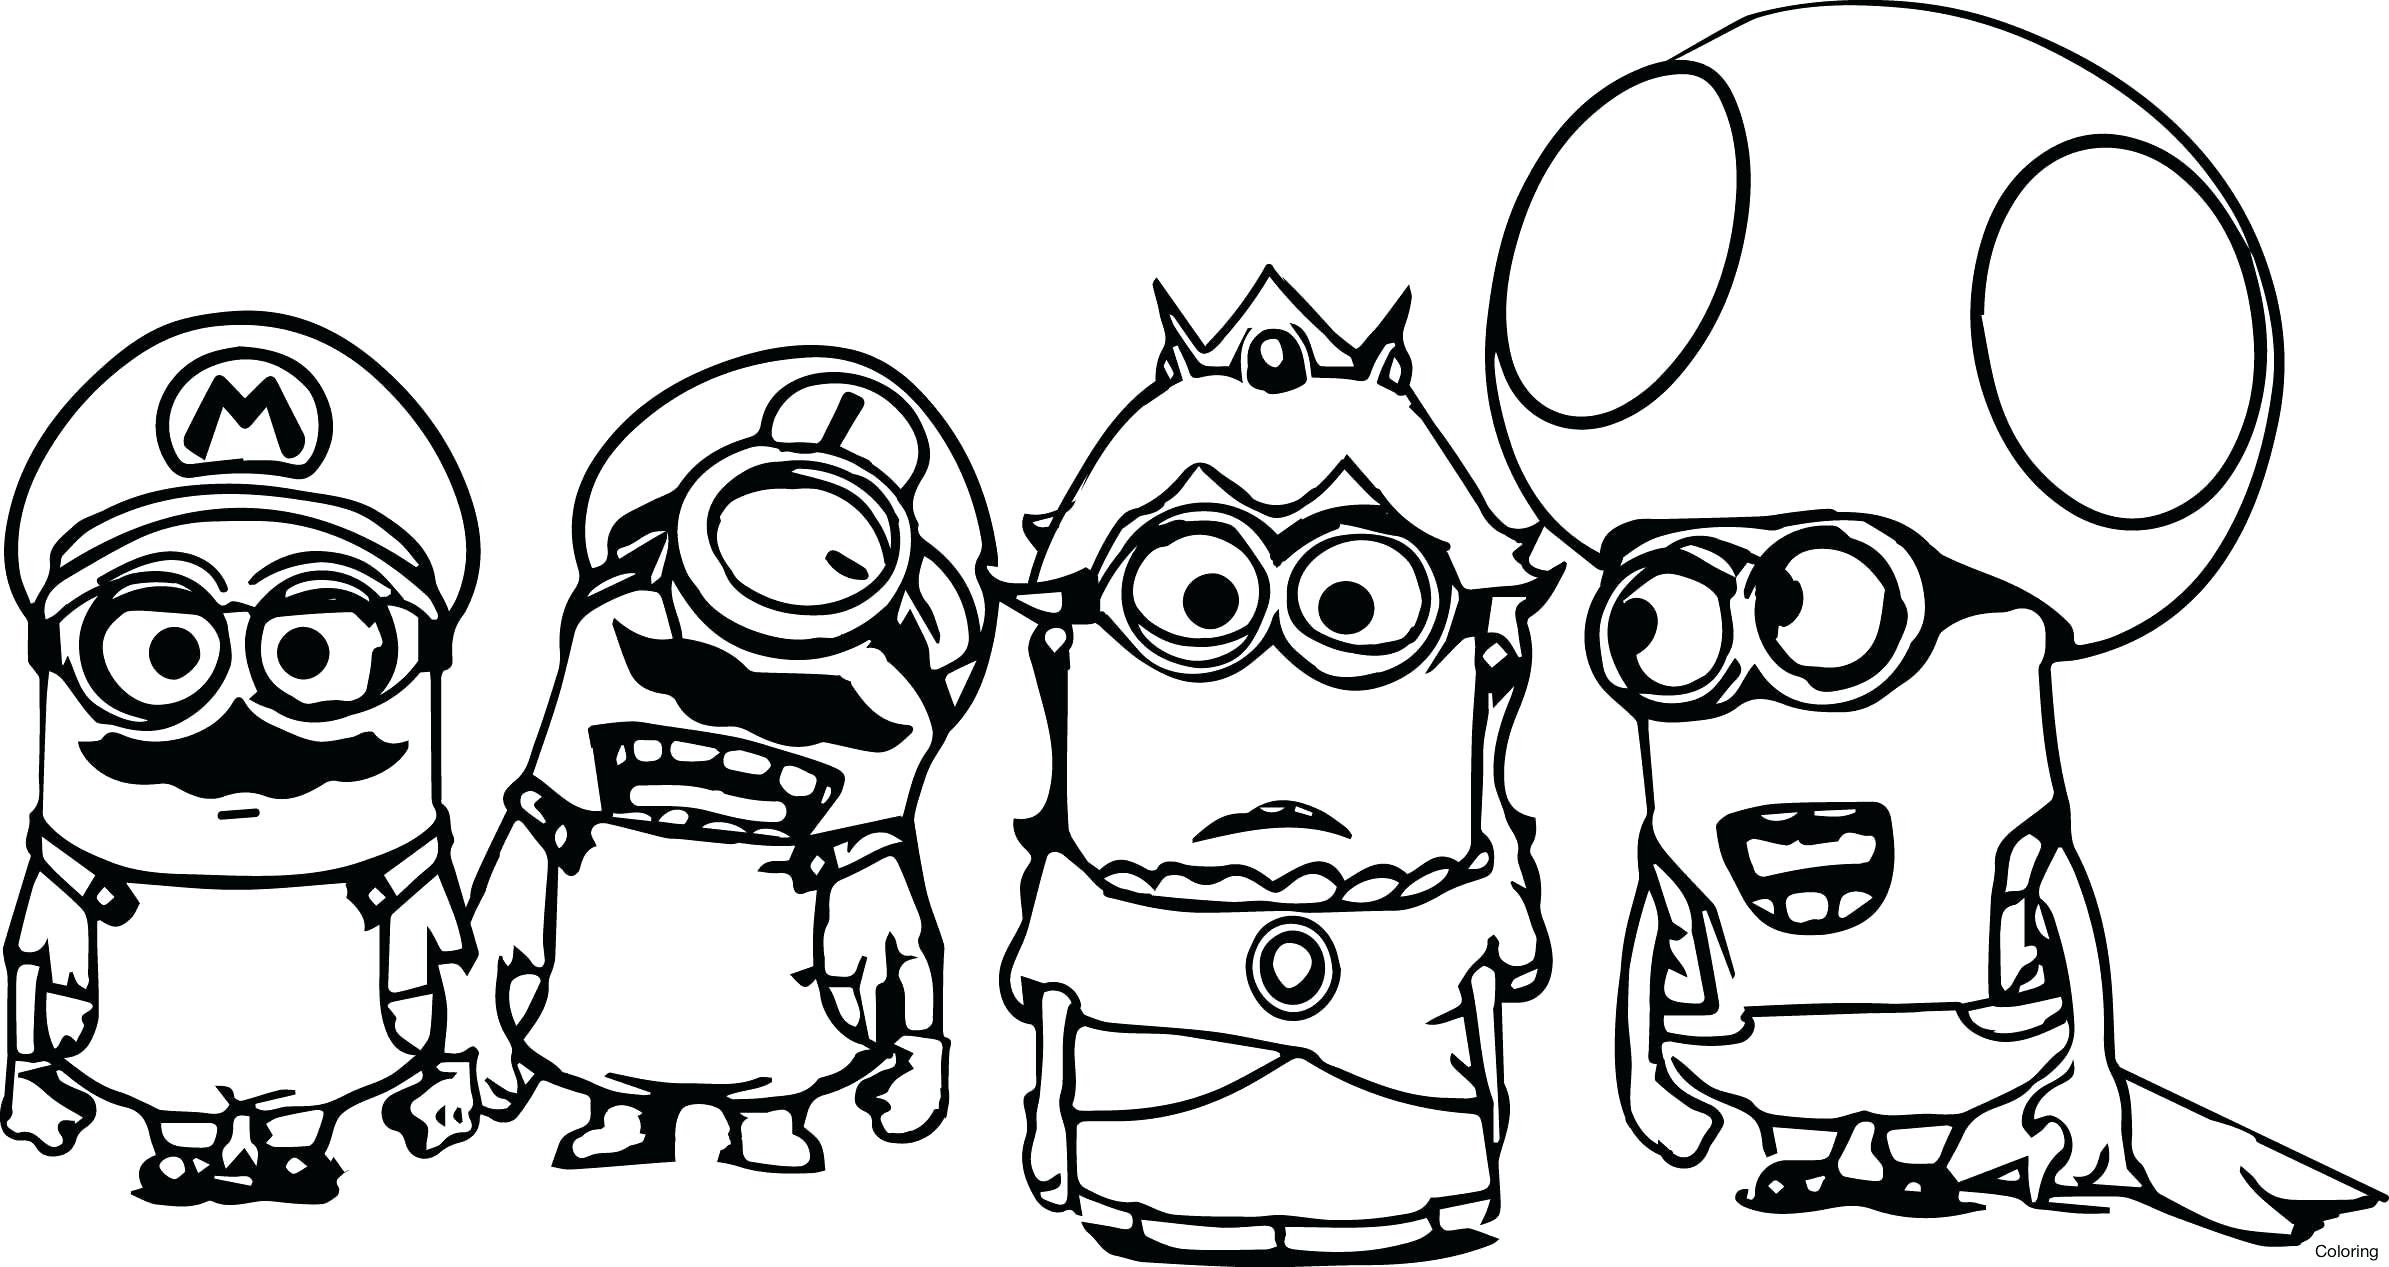 Minion Coloring Pages To Print at GetDrawings | Free download